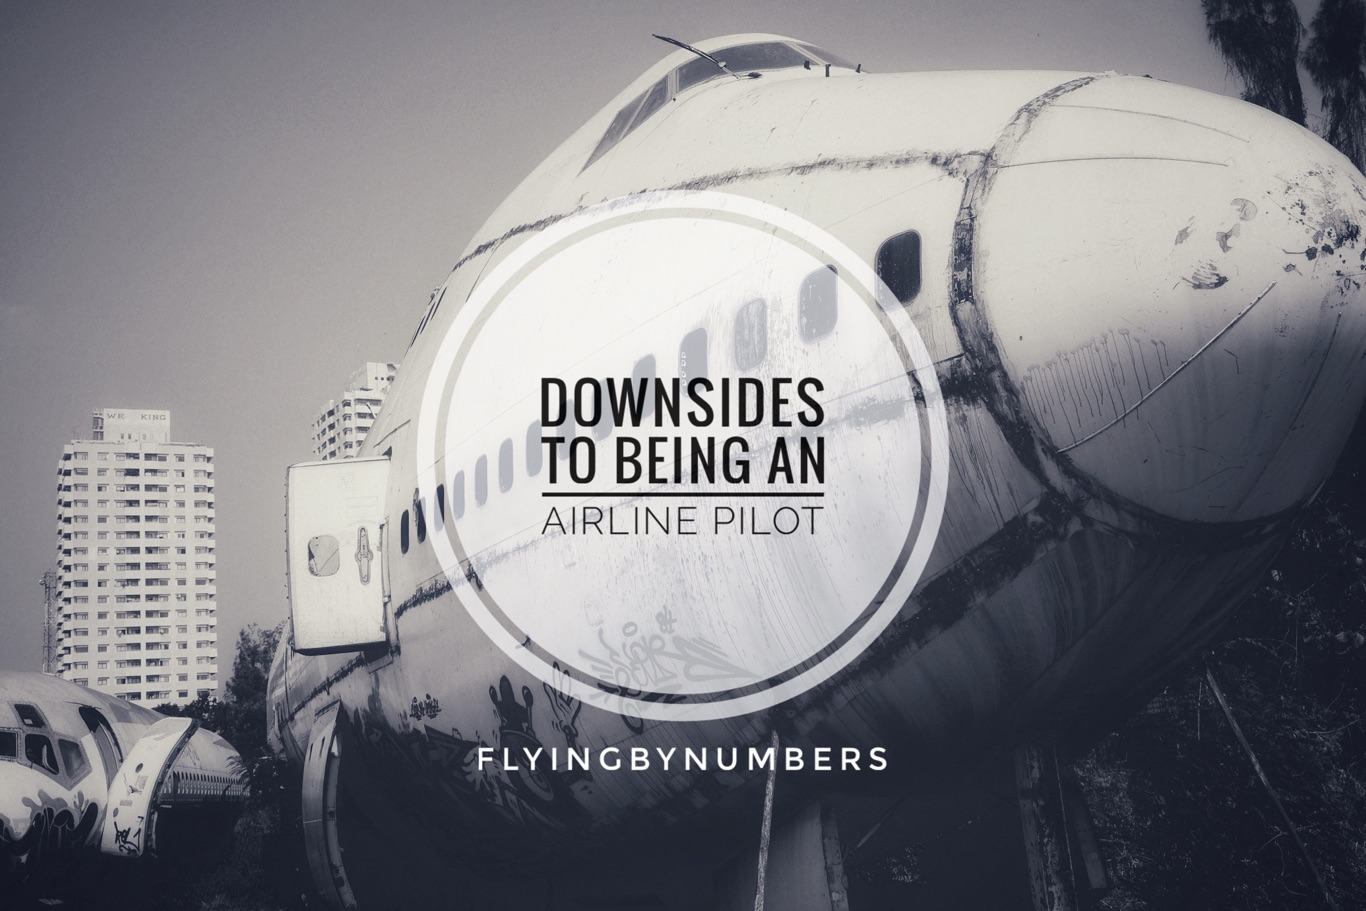 Old aircraft and a list of downsides to becoming an airline pilot